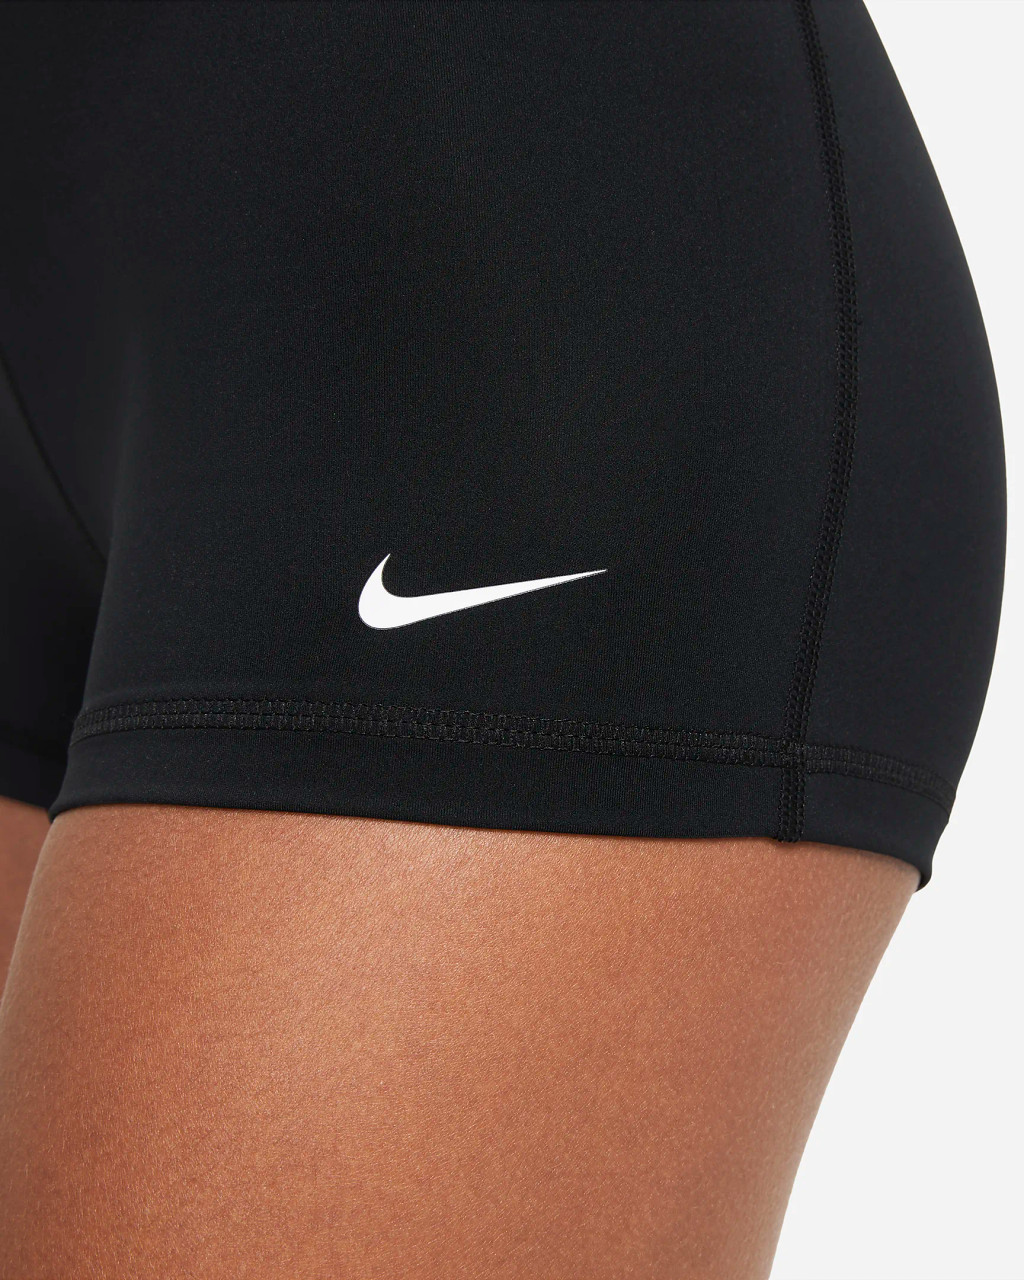 andres dow recommends Nike Pro Volleyball Spandex Shorts